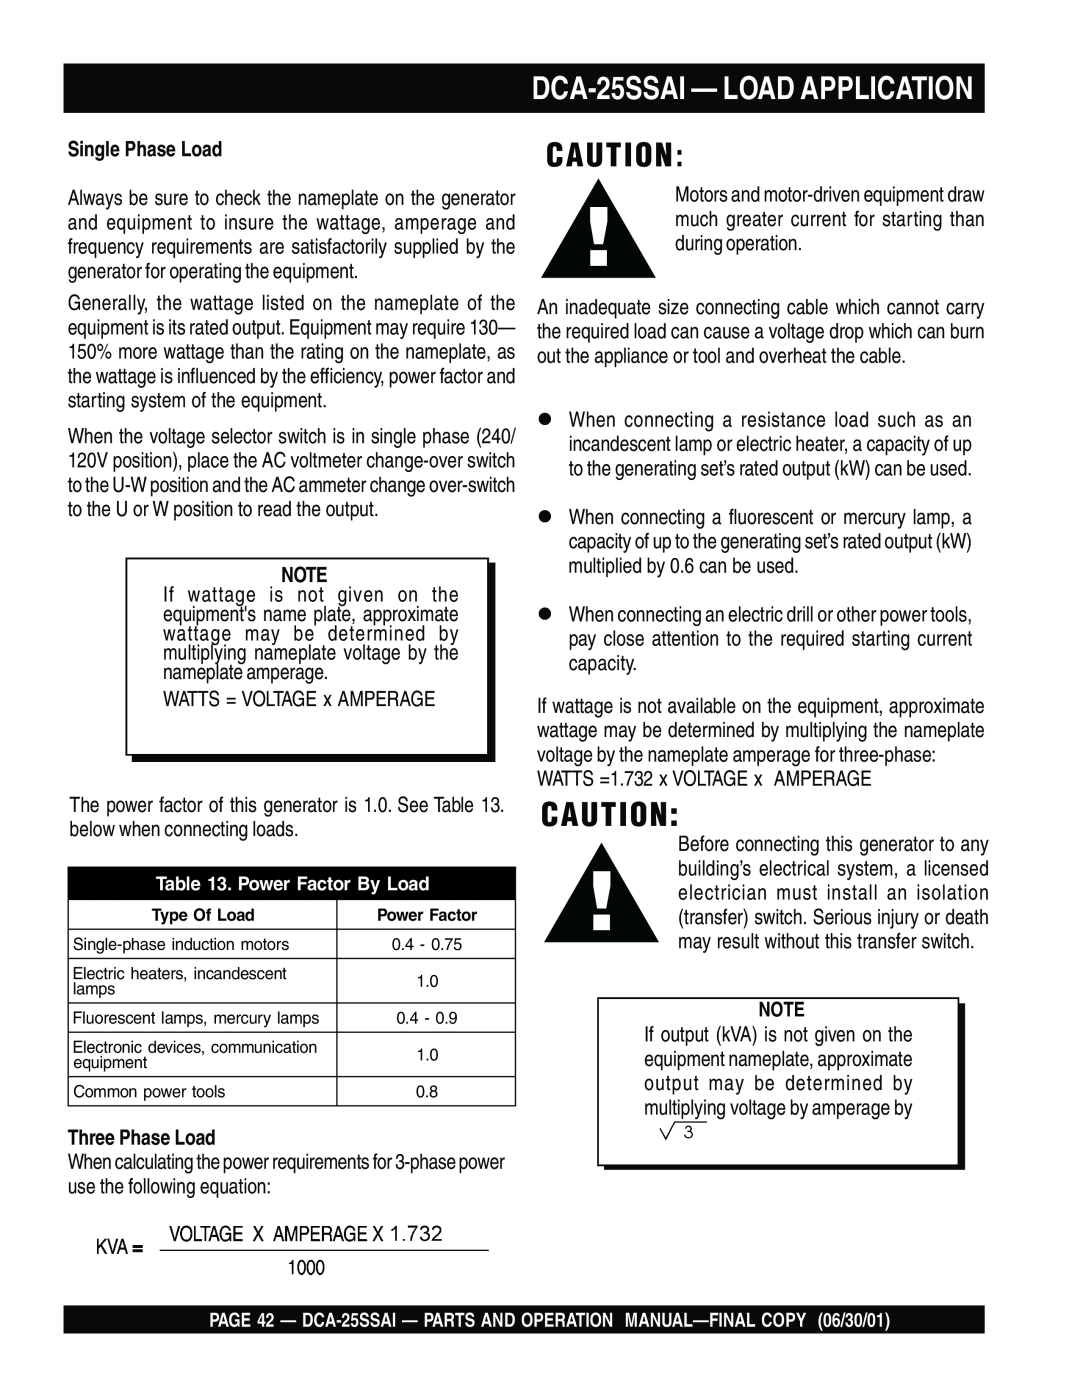 Multiquip operation manual DCA-25SSAI - LOAD APPLICATION, Single Phase Load, Three Phase Load 